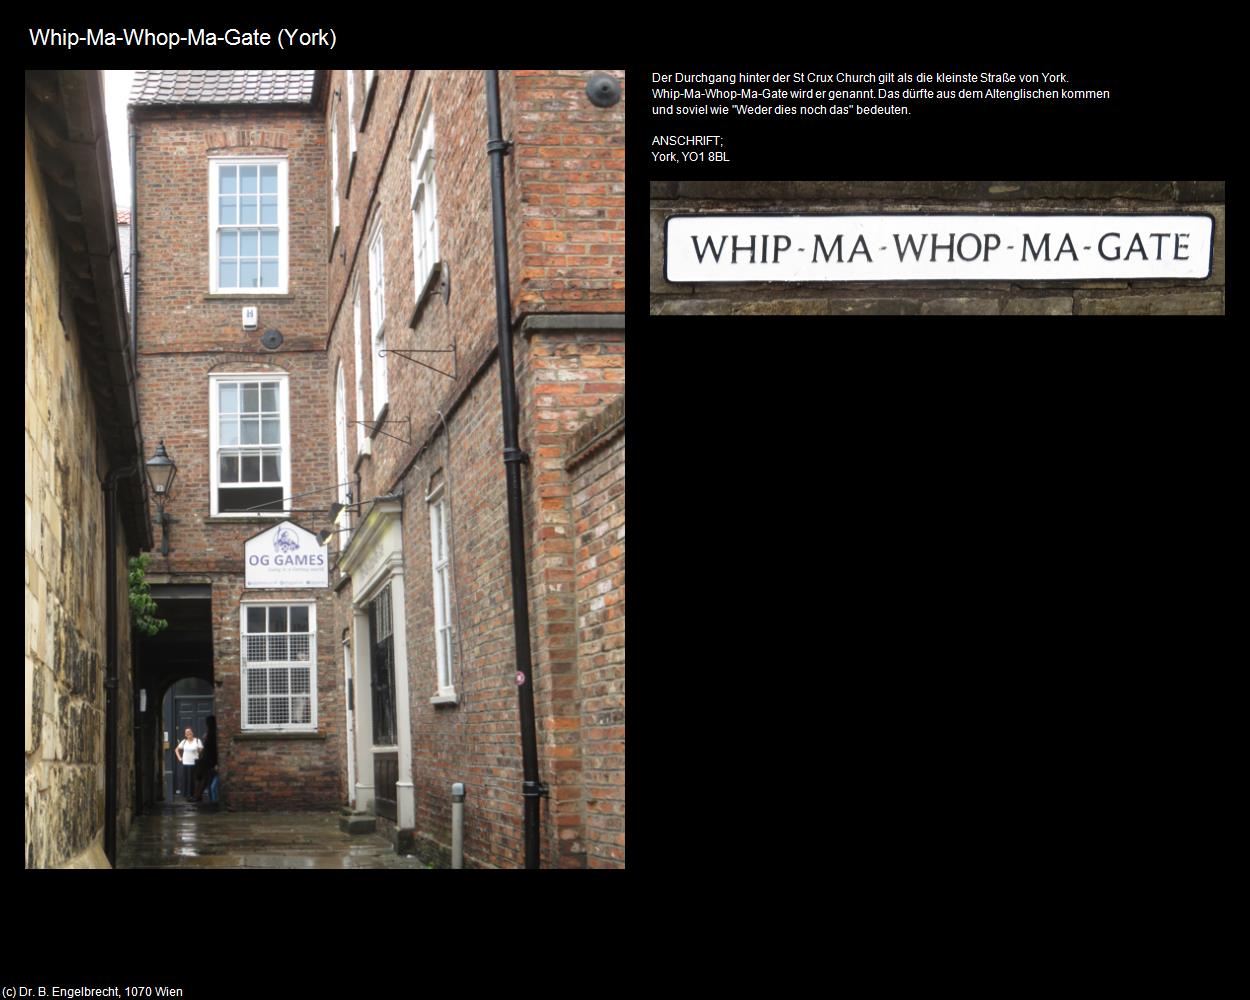 Whip-Ma-Whop-Ma-Gate (York, England) in Kulturatlas-ENGLAND und WALES